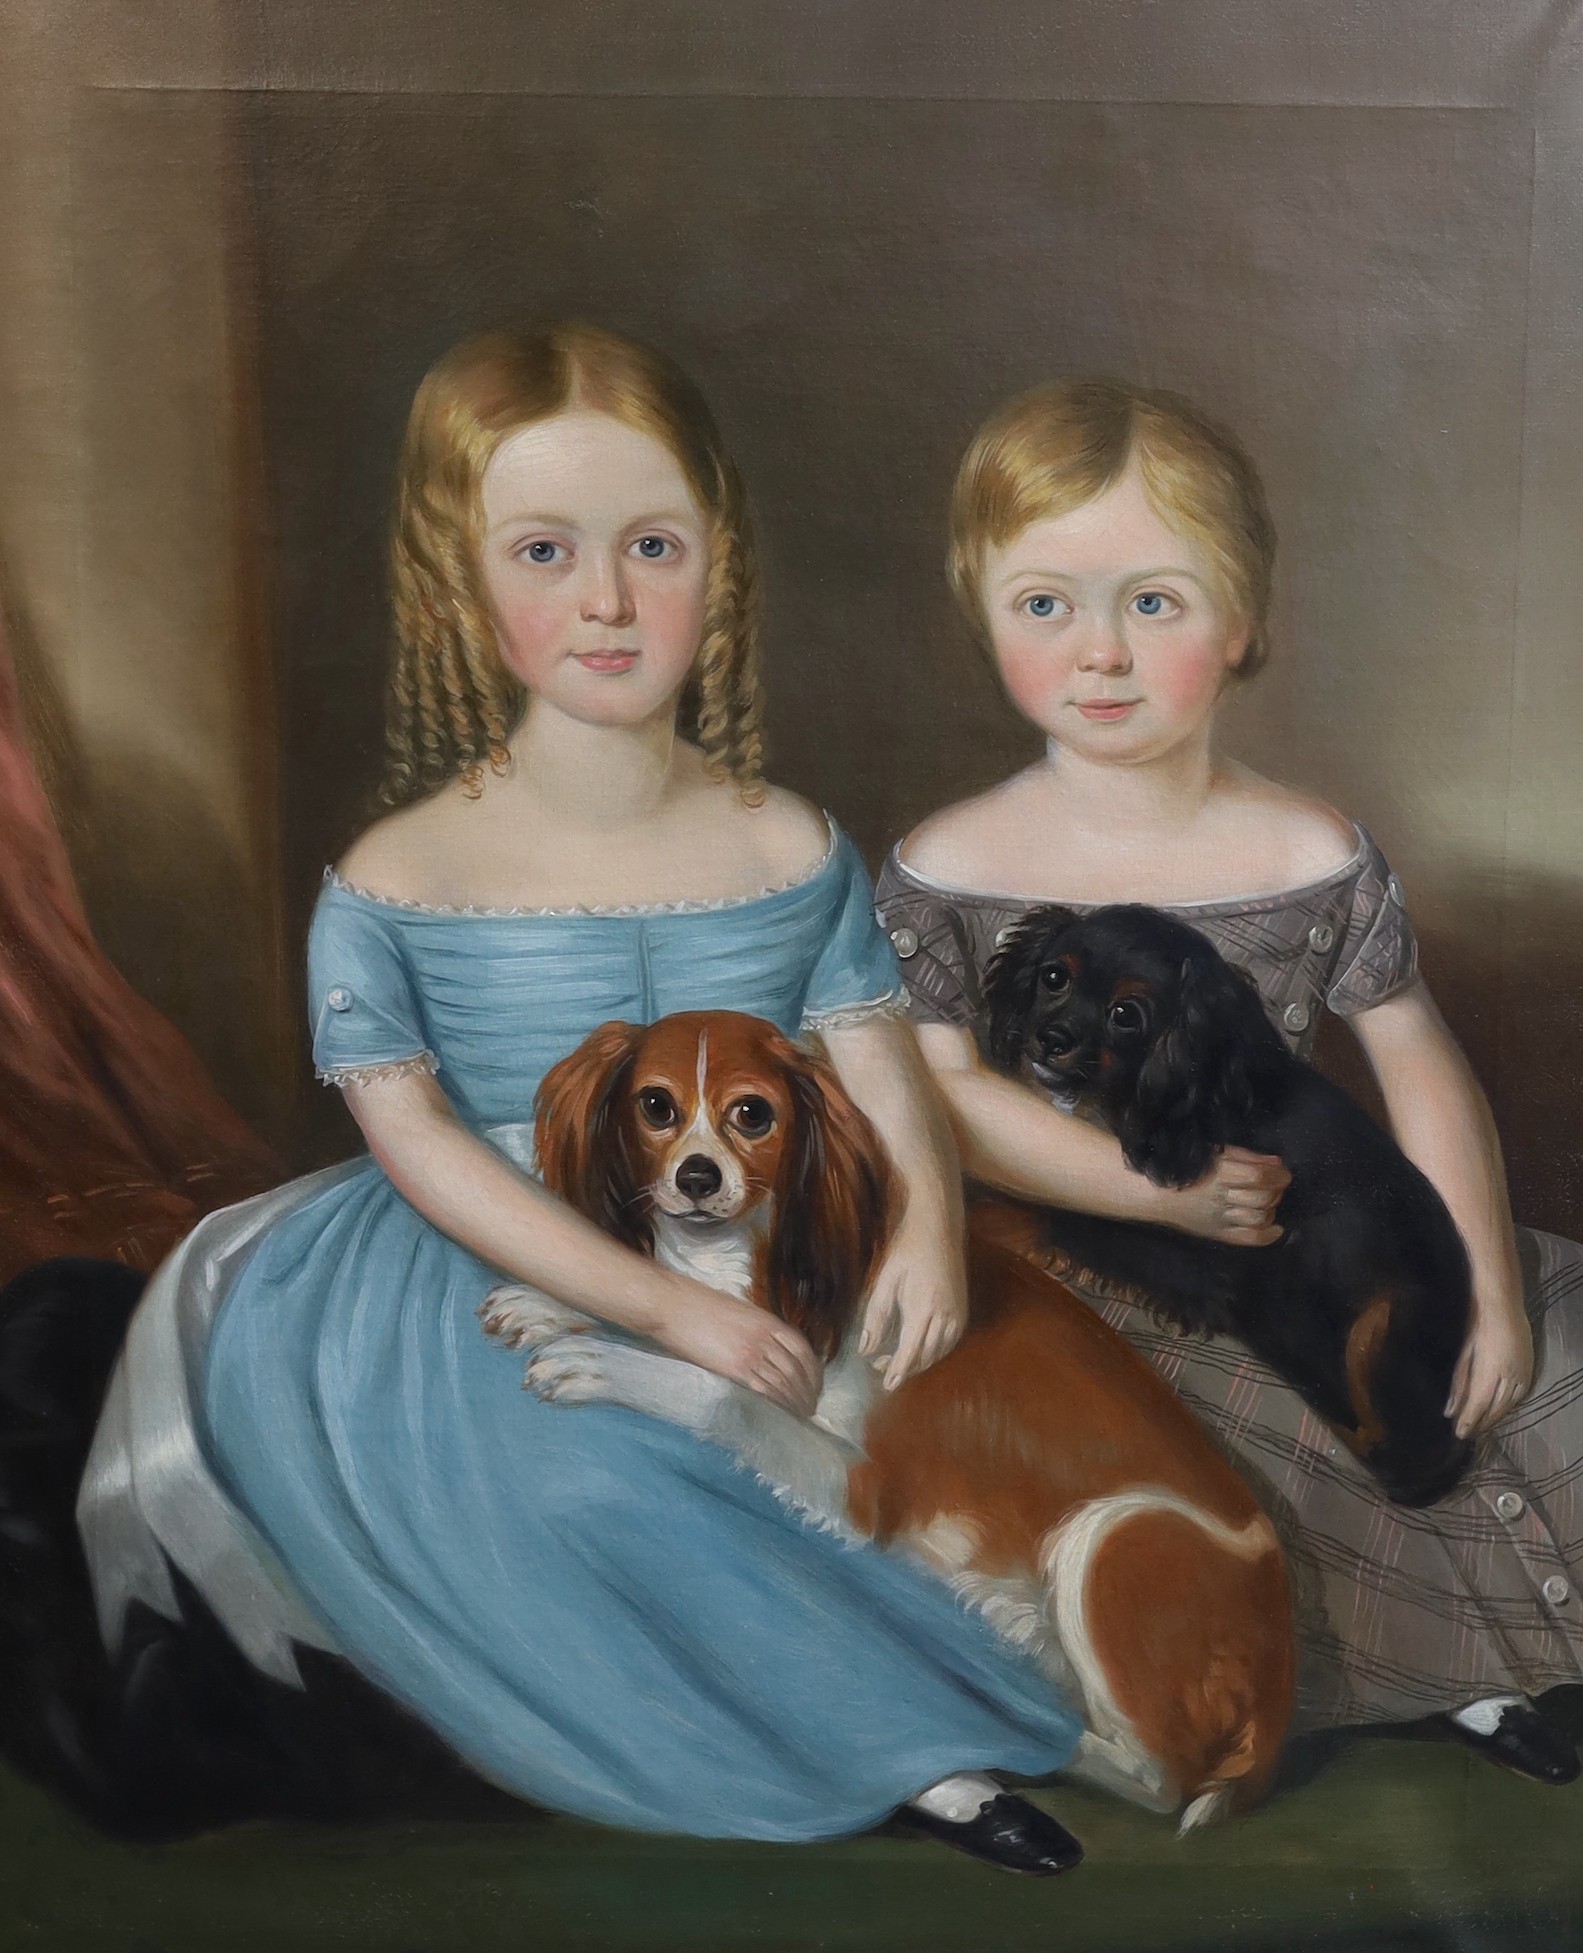 Mid 19th century English School, Portrait of two children seated with their King Charles Spaniels, oil on canvas, 91 x 74cm